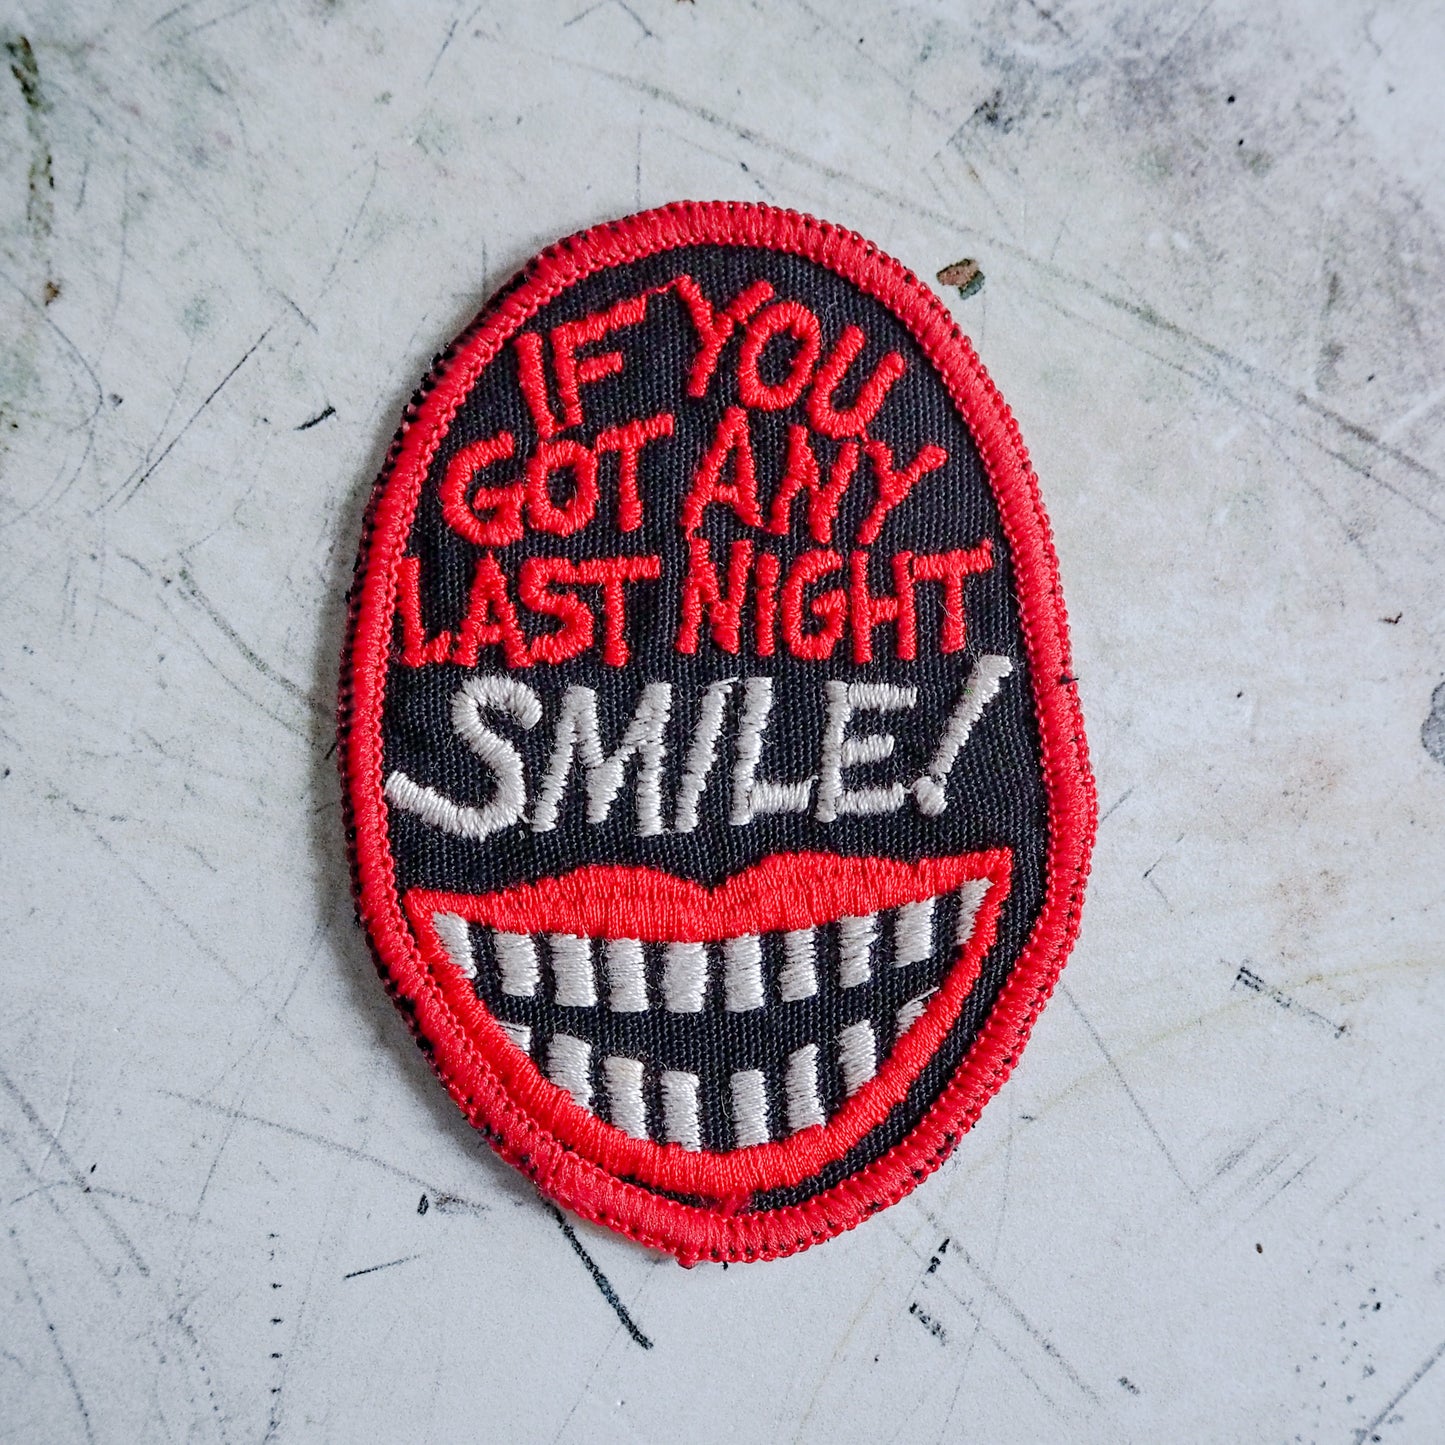 Vintage 1970s If You Got Any Last Night Patch